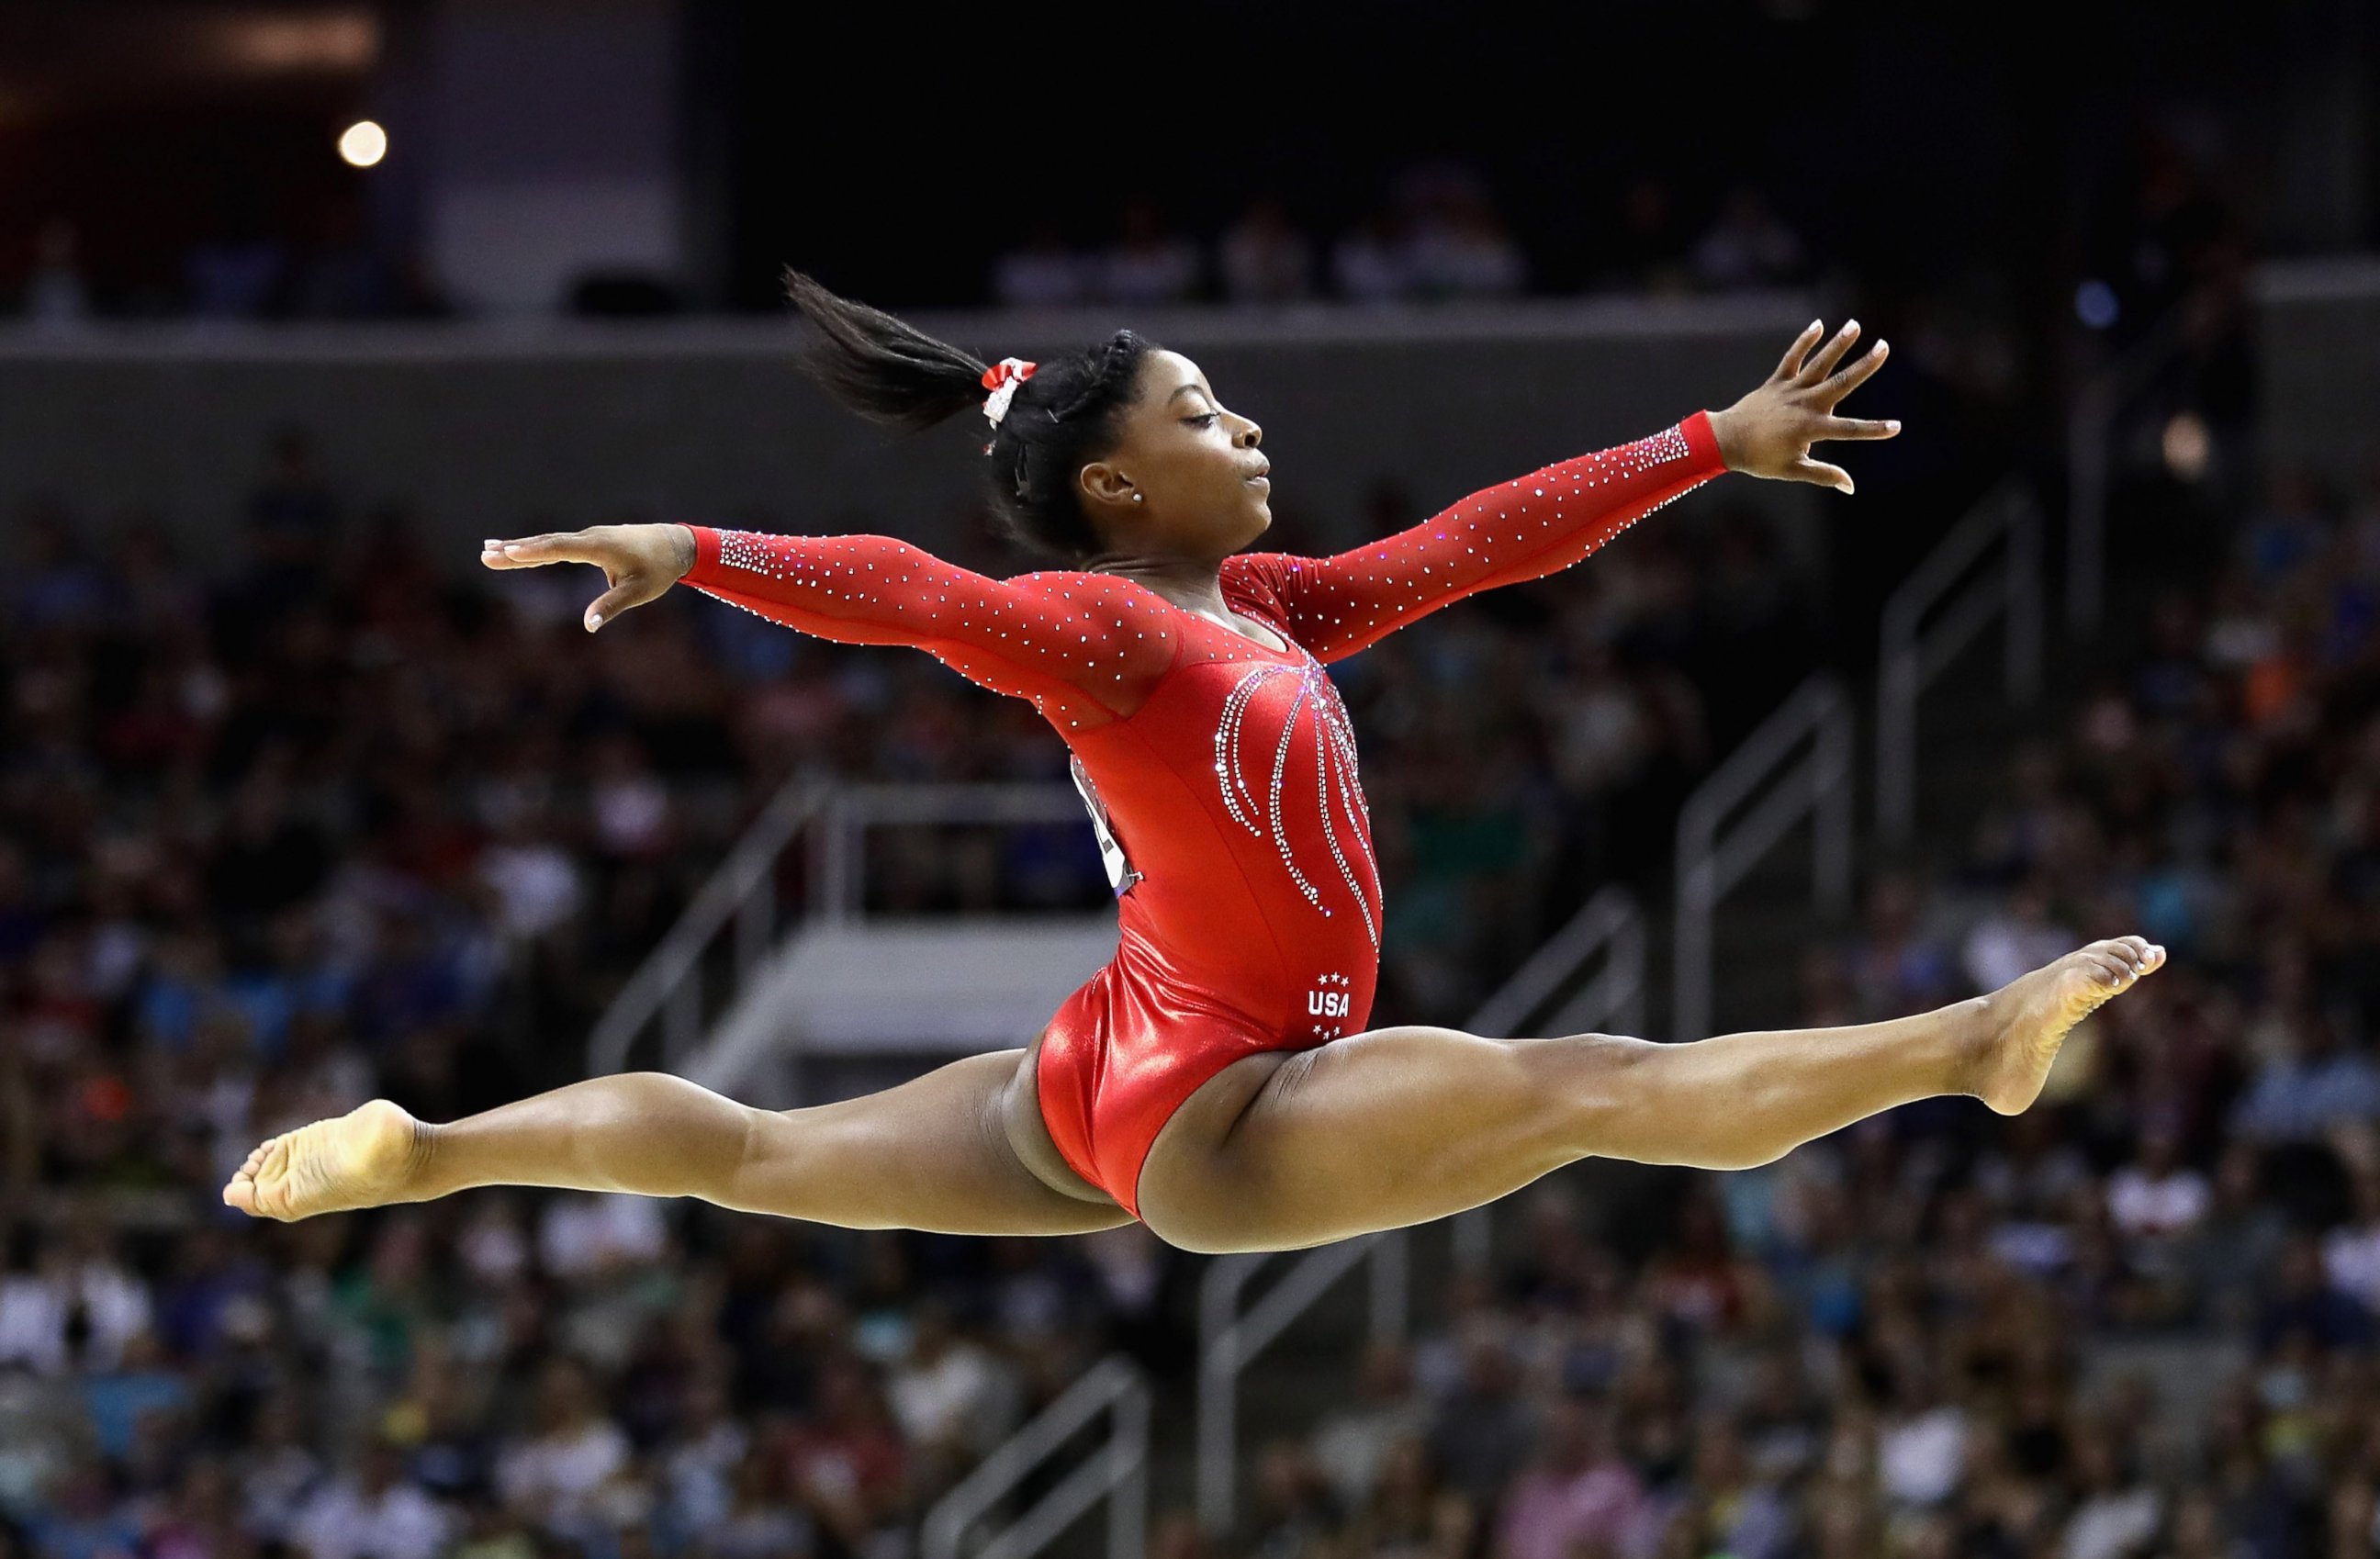 PHOTO: Simone Biles competes in the floor exercise during Day two of the 2016 U.S. Women's Gymnastics Olympic Trials at SAP Center, July 10, 2016, in San Jose, California.